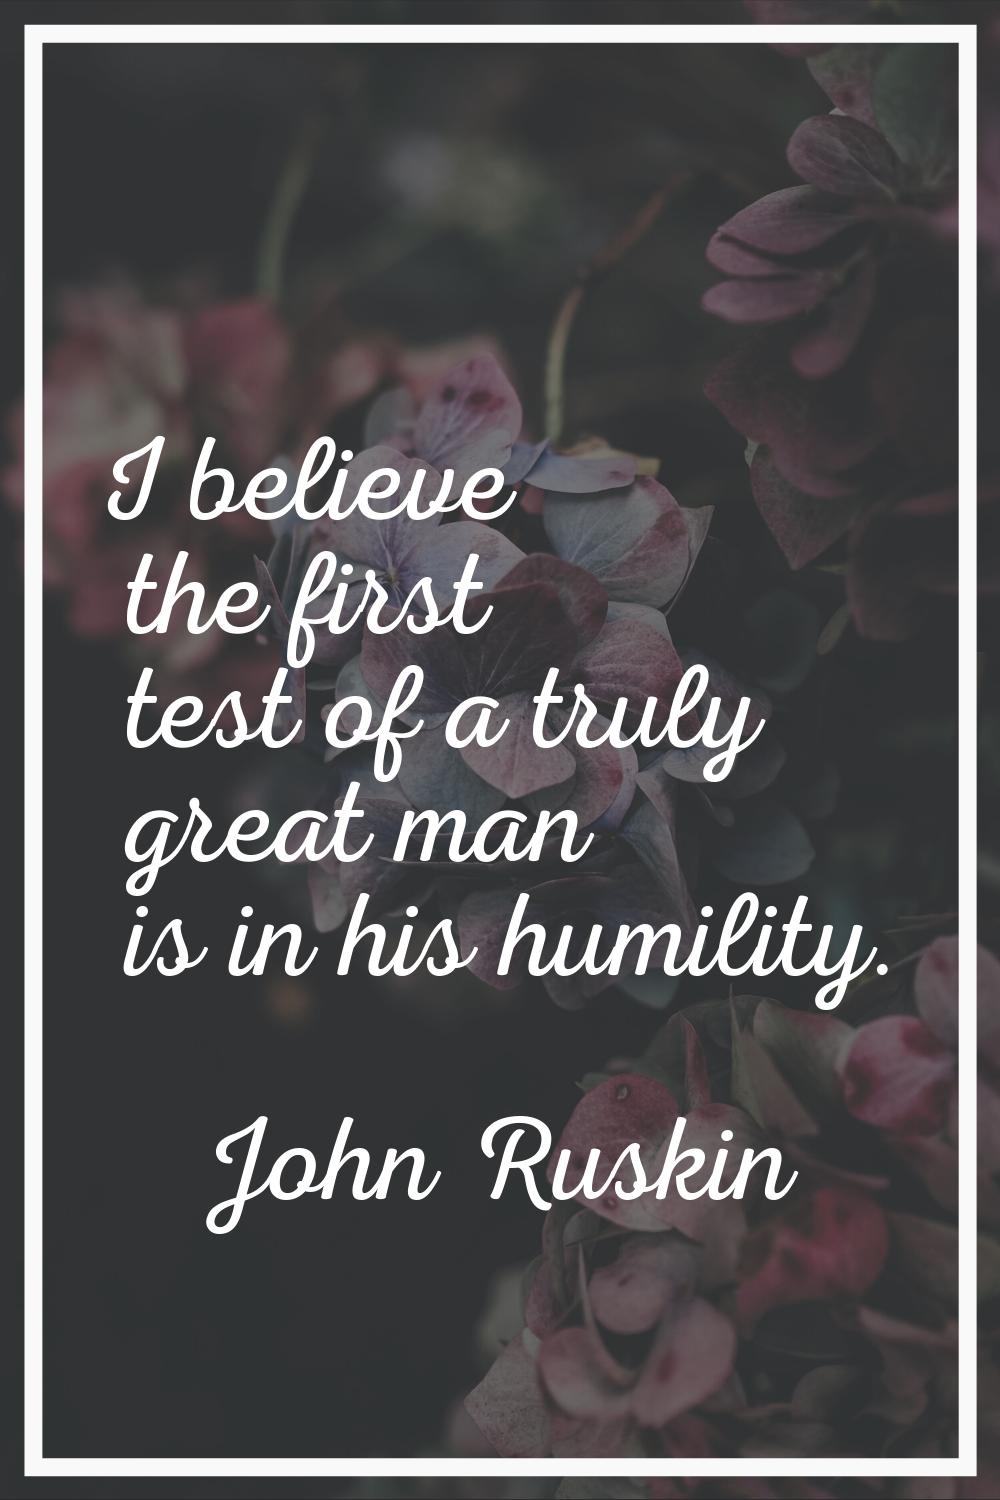 I believe the first test of a truly great man is in his humility.